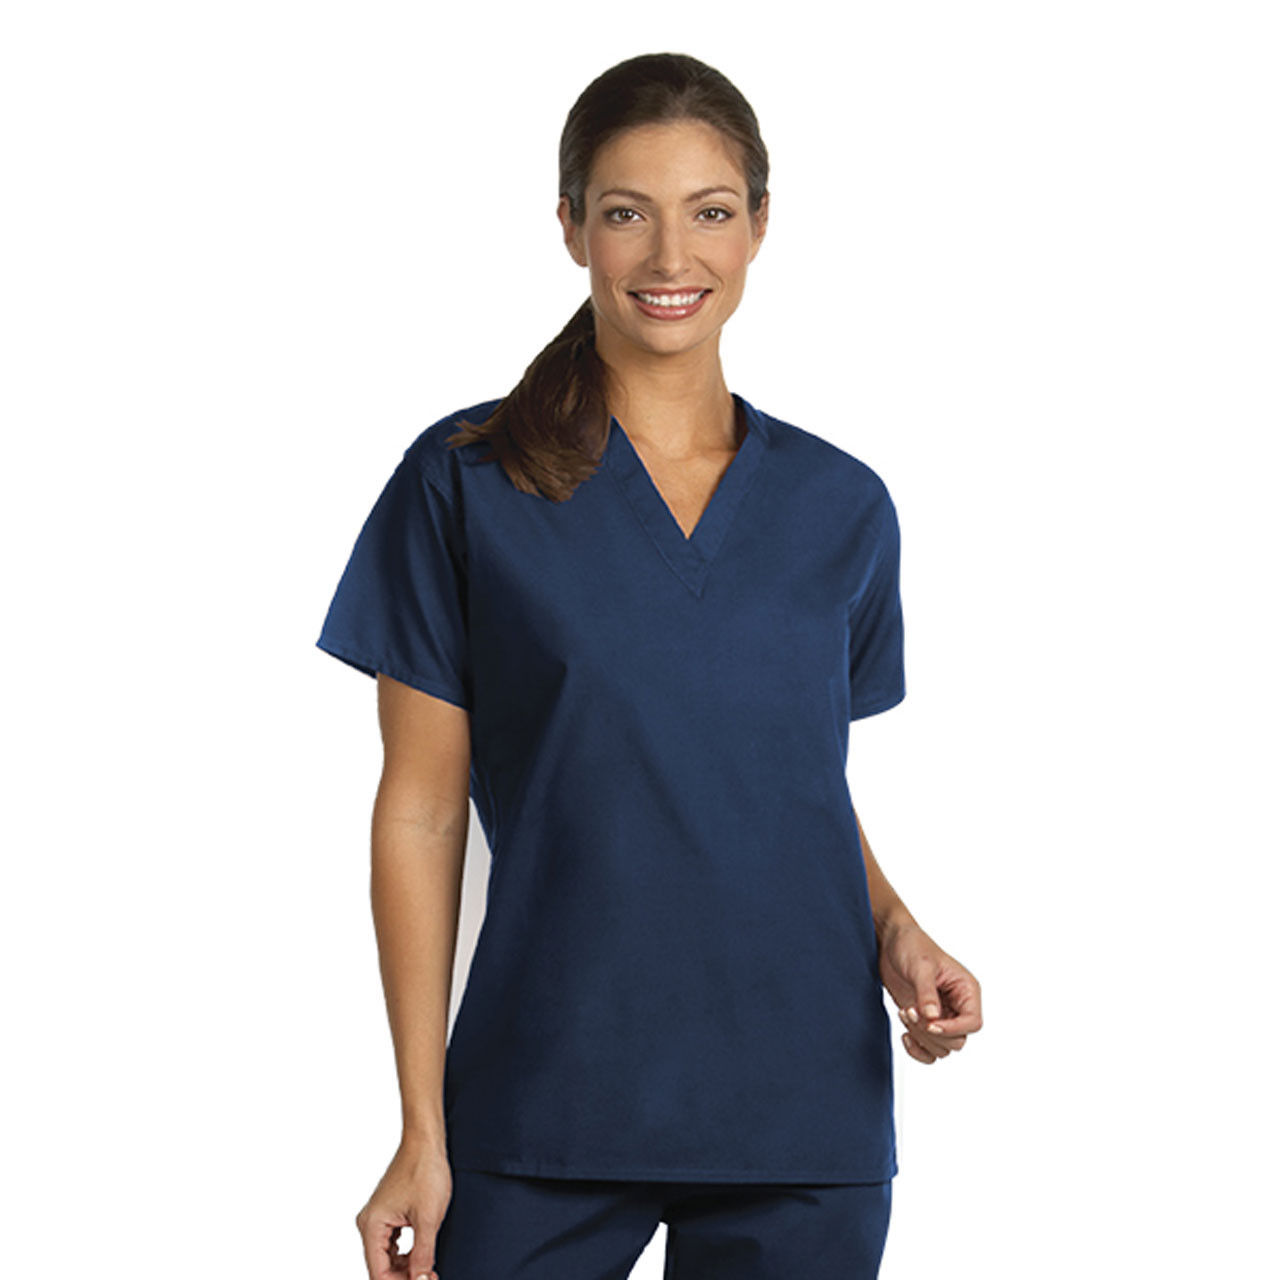 Unisex Wholesale Scrub Set, with Pocket, Navy - In Bulk of 12 or 72 Questions & Answers